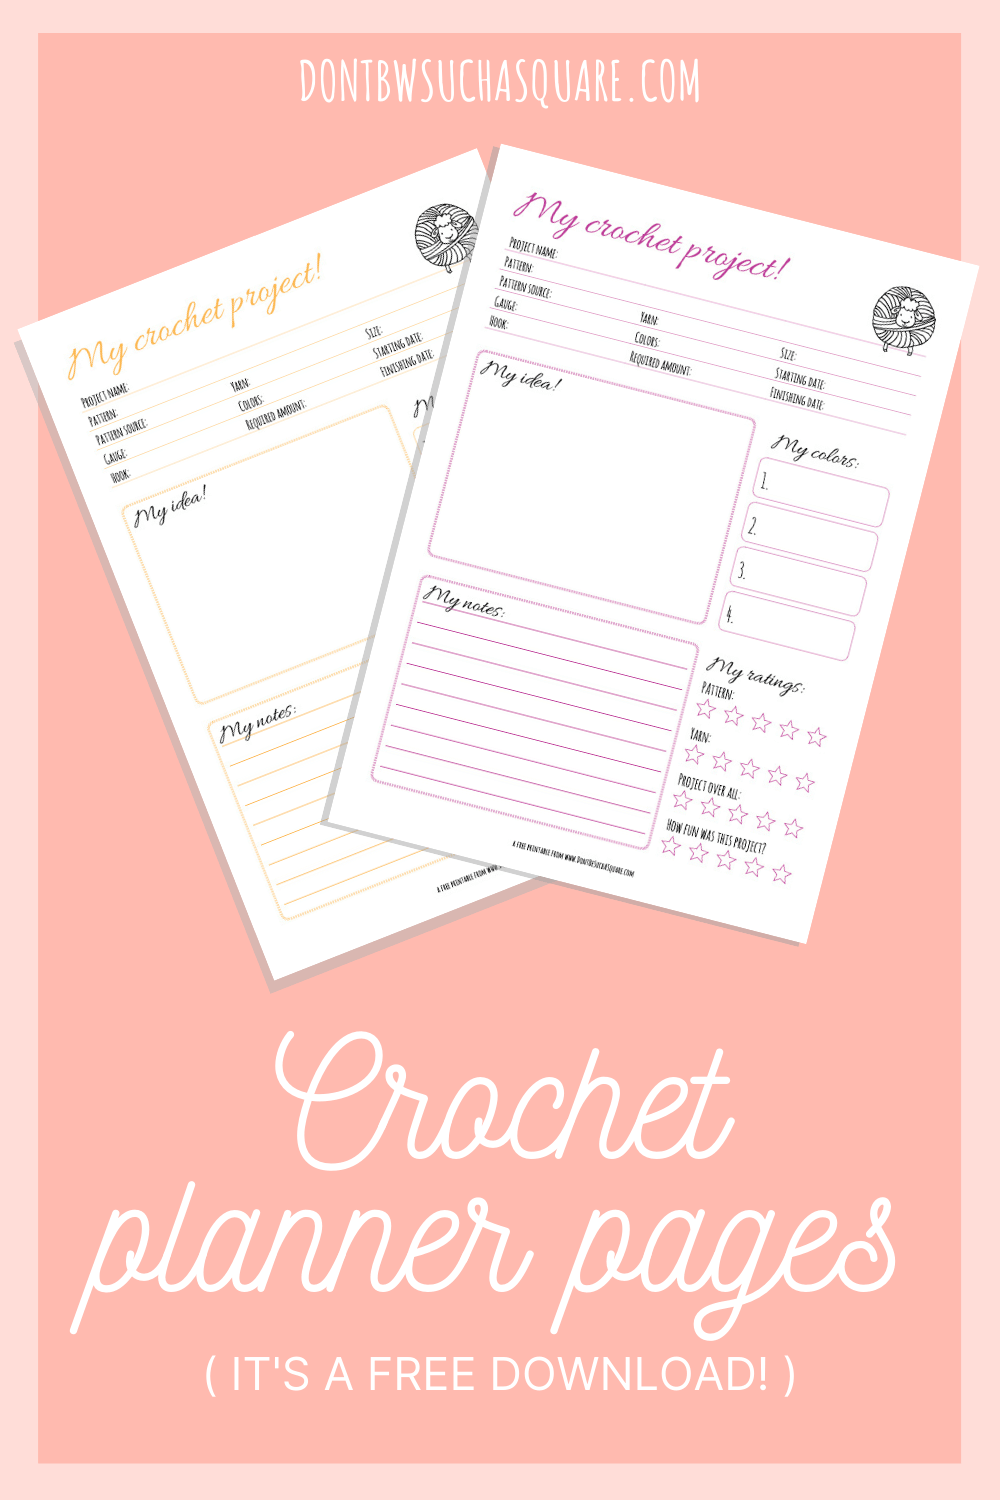 How To Make A Crochet Project Planner And Why You Need One